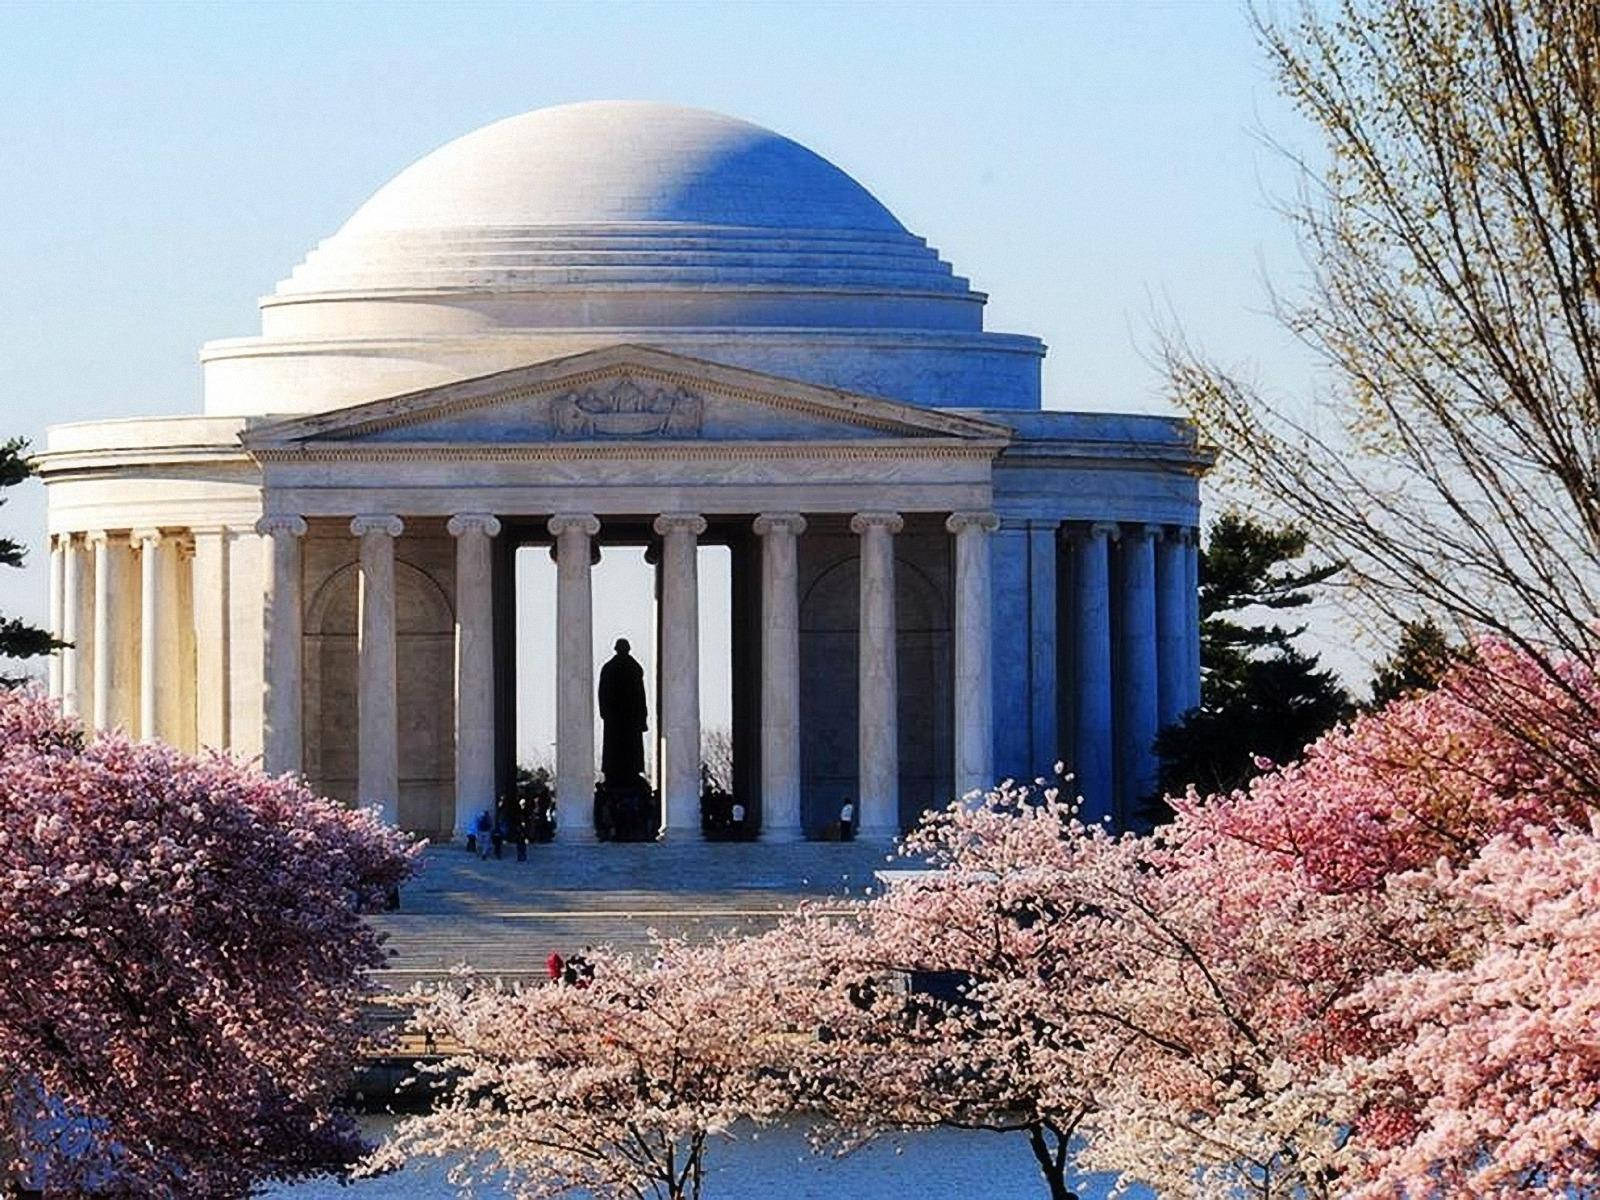 Picturesque Jefferson Memorial Framed by Blossoming Cherry Trees Wallpaper